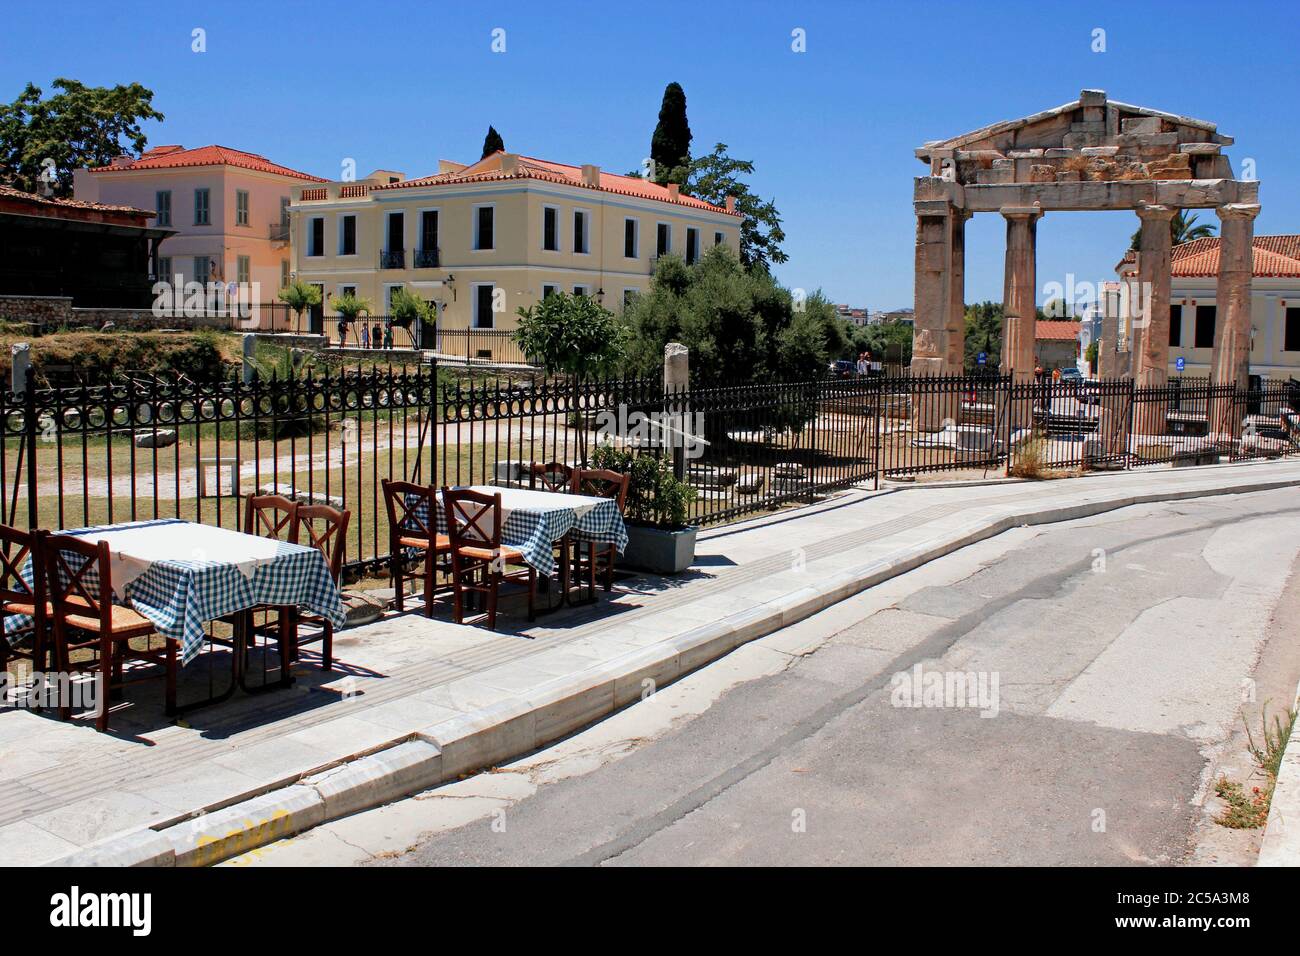 Greece, Athens, June 28 2020 - Empty chairs and tables of a traditional restaurant in the touristic district of Plaka. Despite the low coronavirus rat Stock Photo